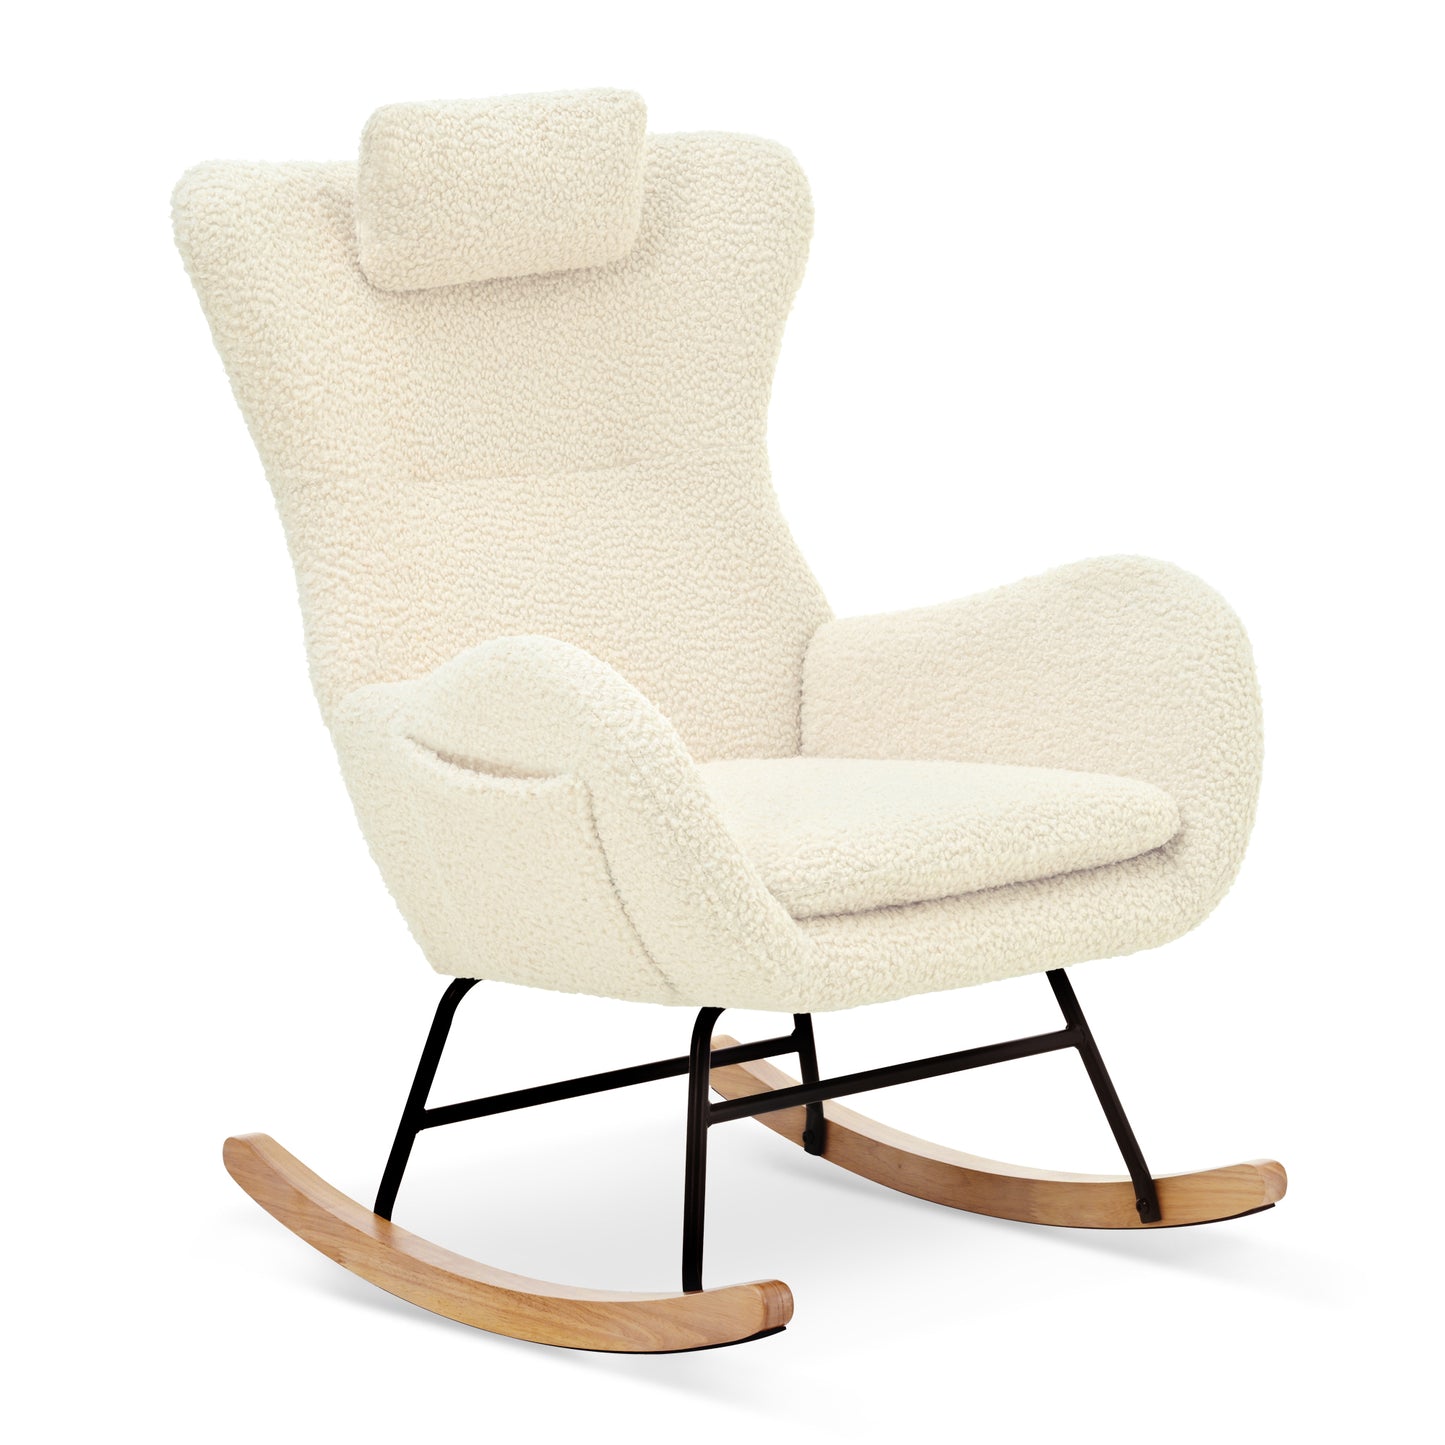 Rocking Chair with rubber leg and cashmere fabric